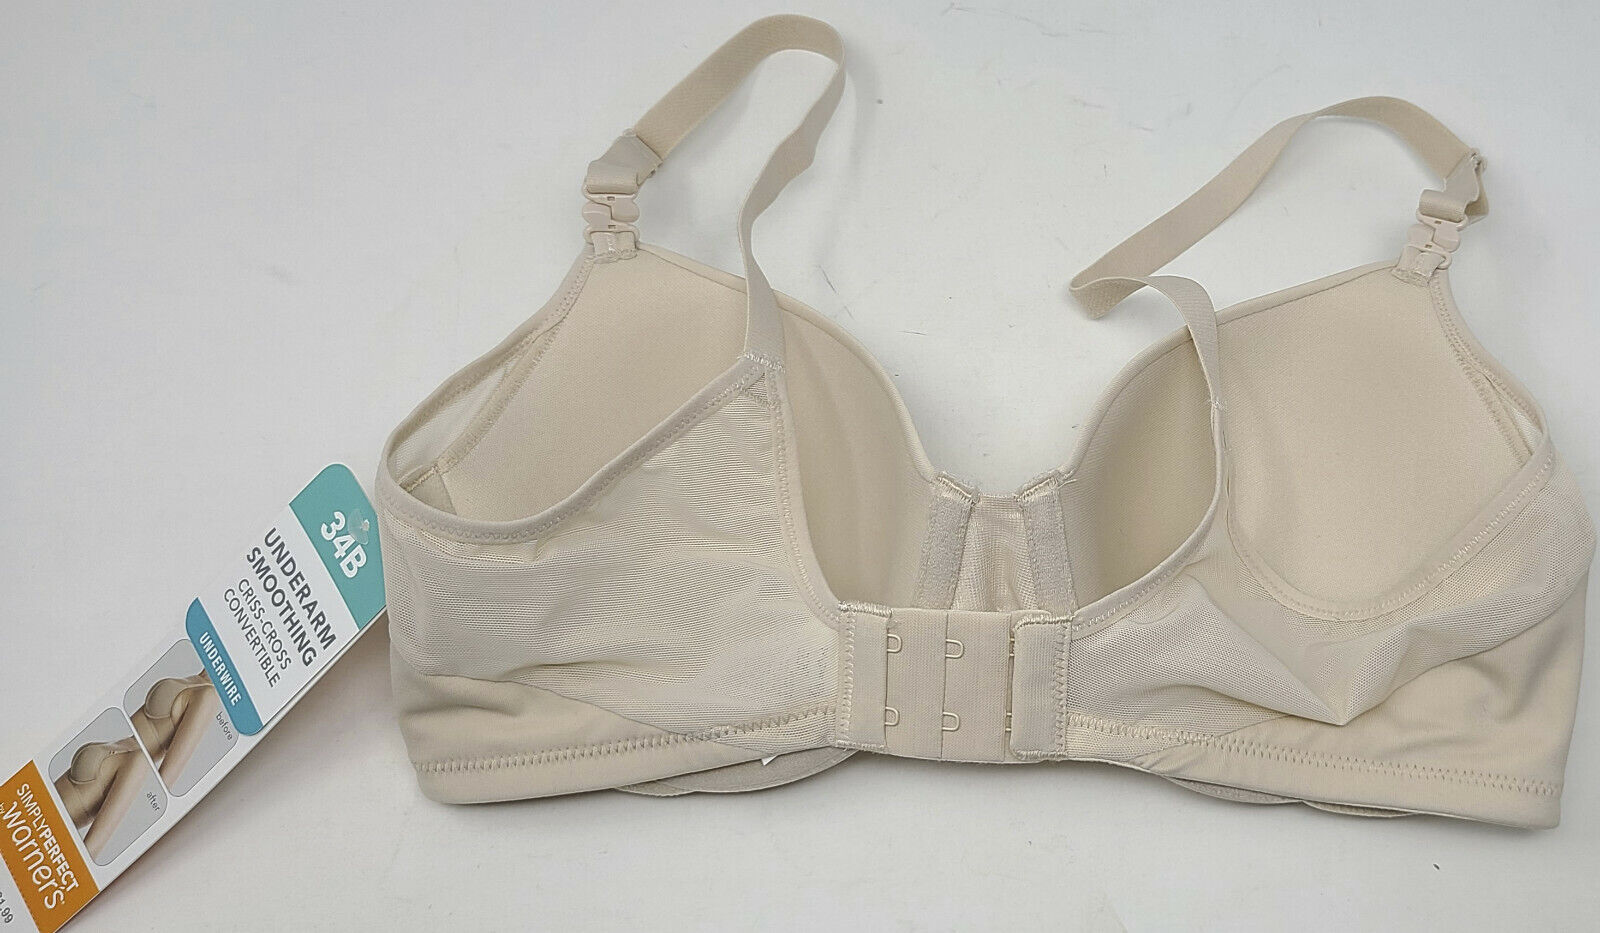 Simply Perfect by Warners Black Breathable Bra